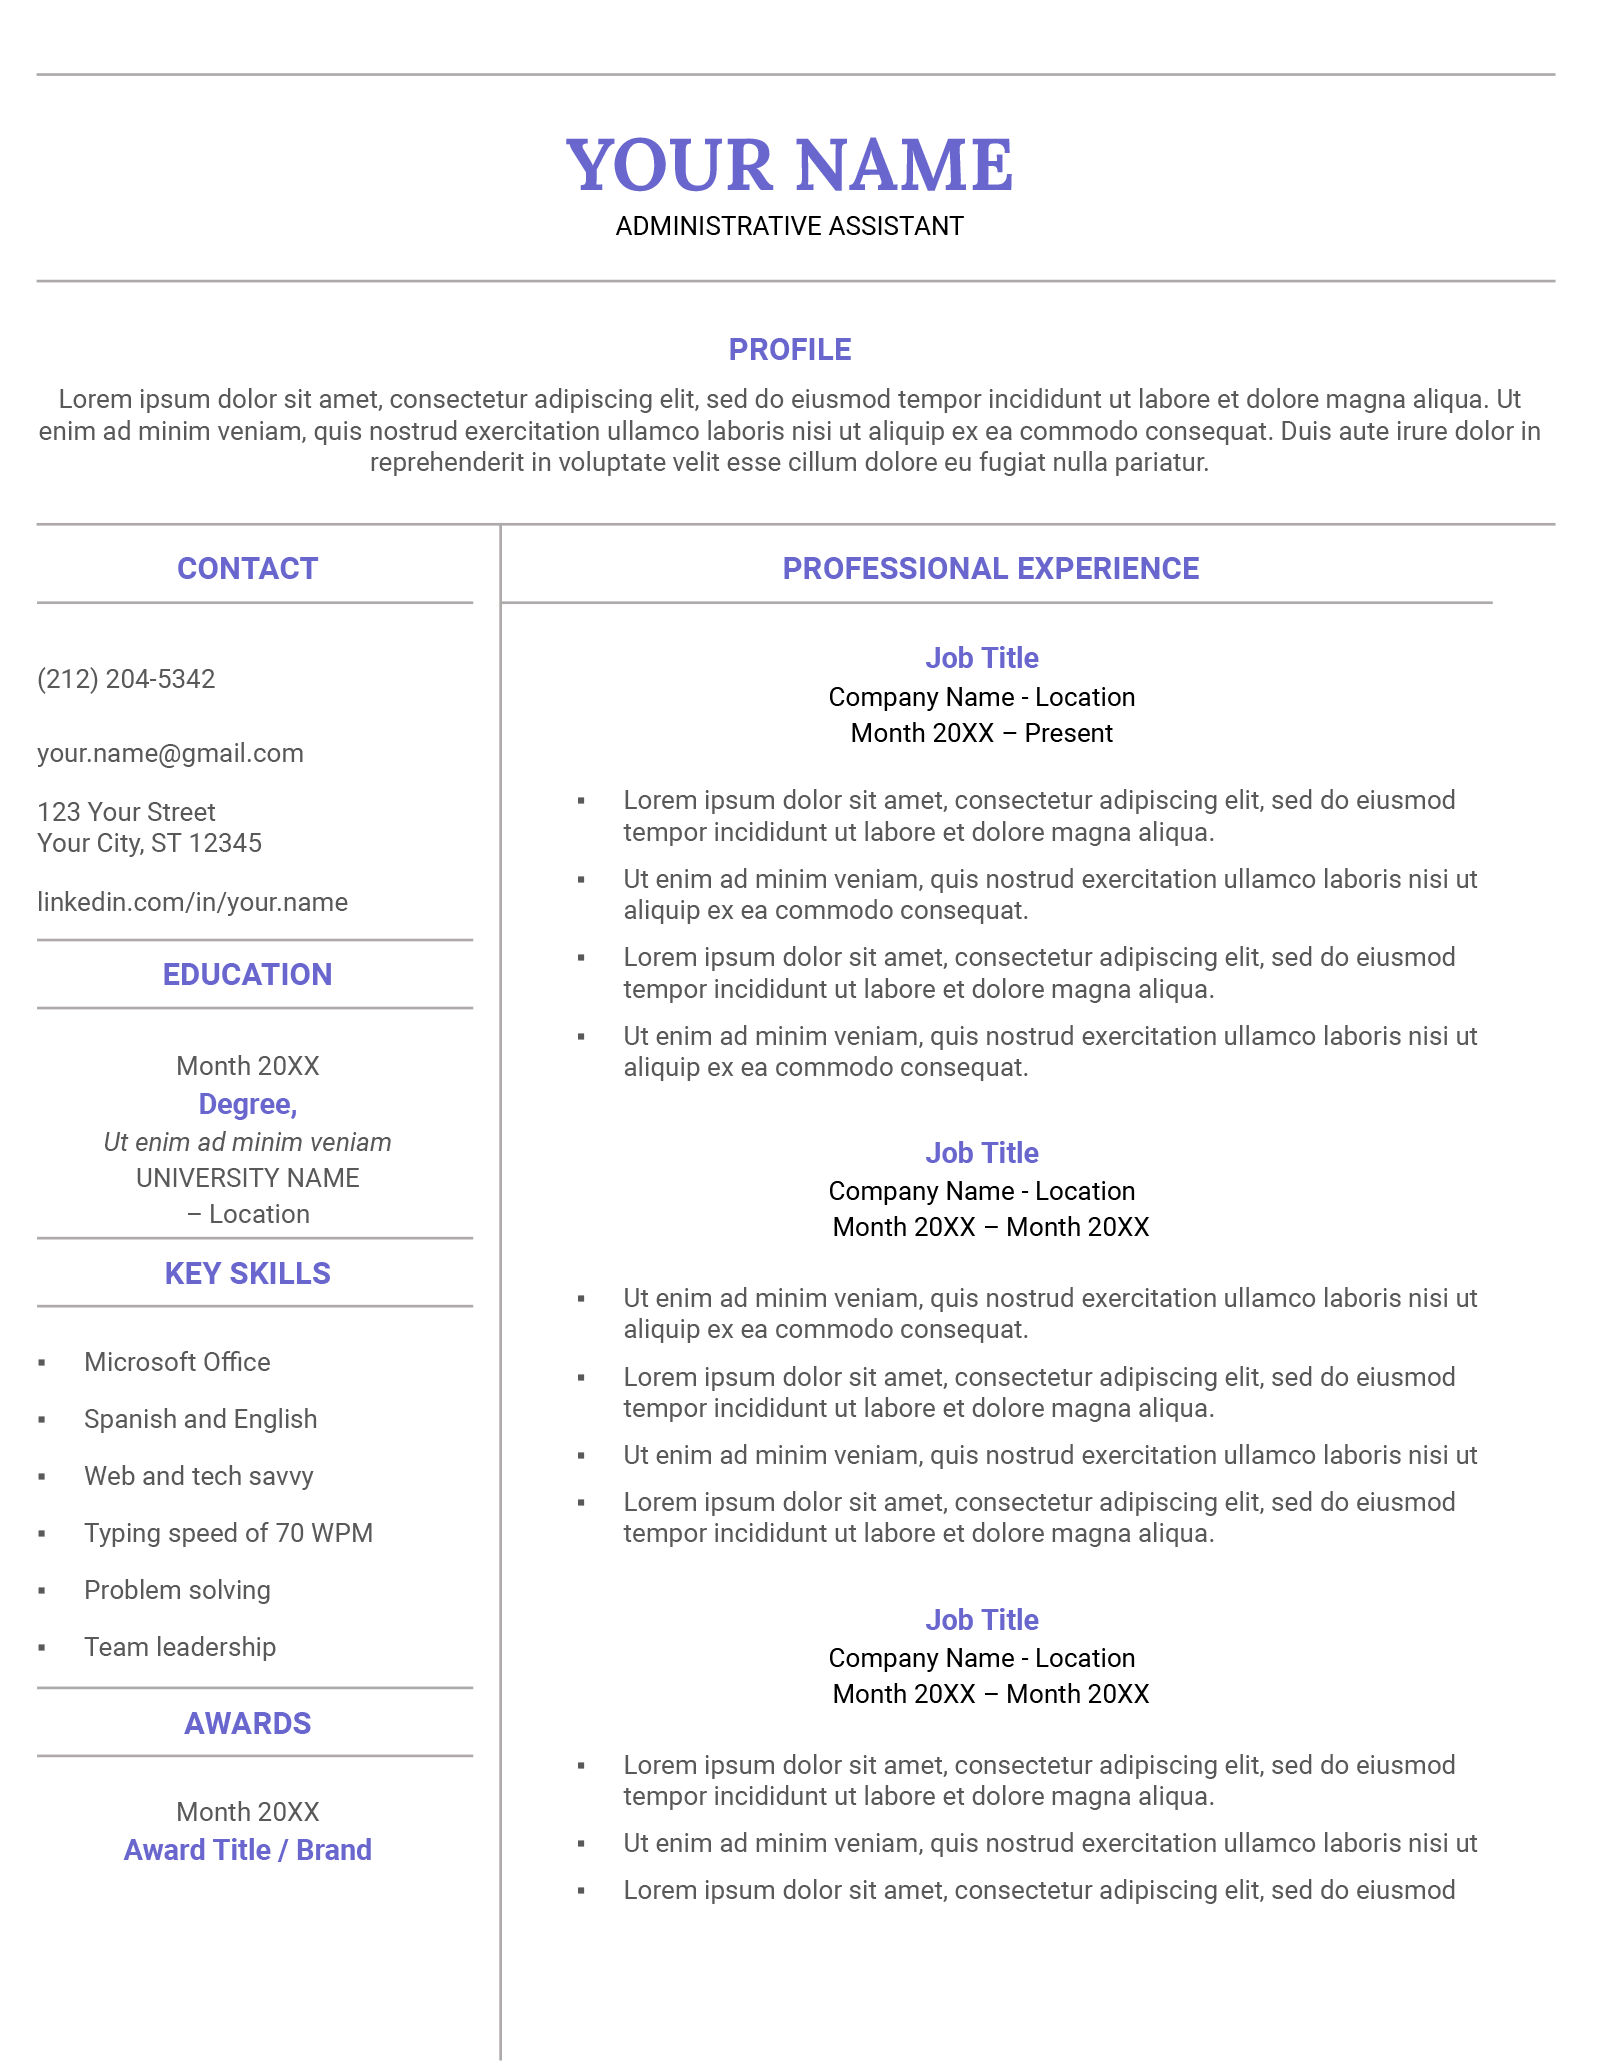 An example of the Canvas resume template for Google Docs